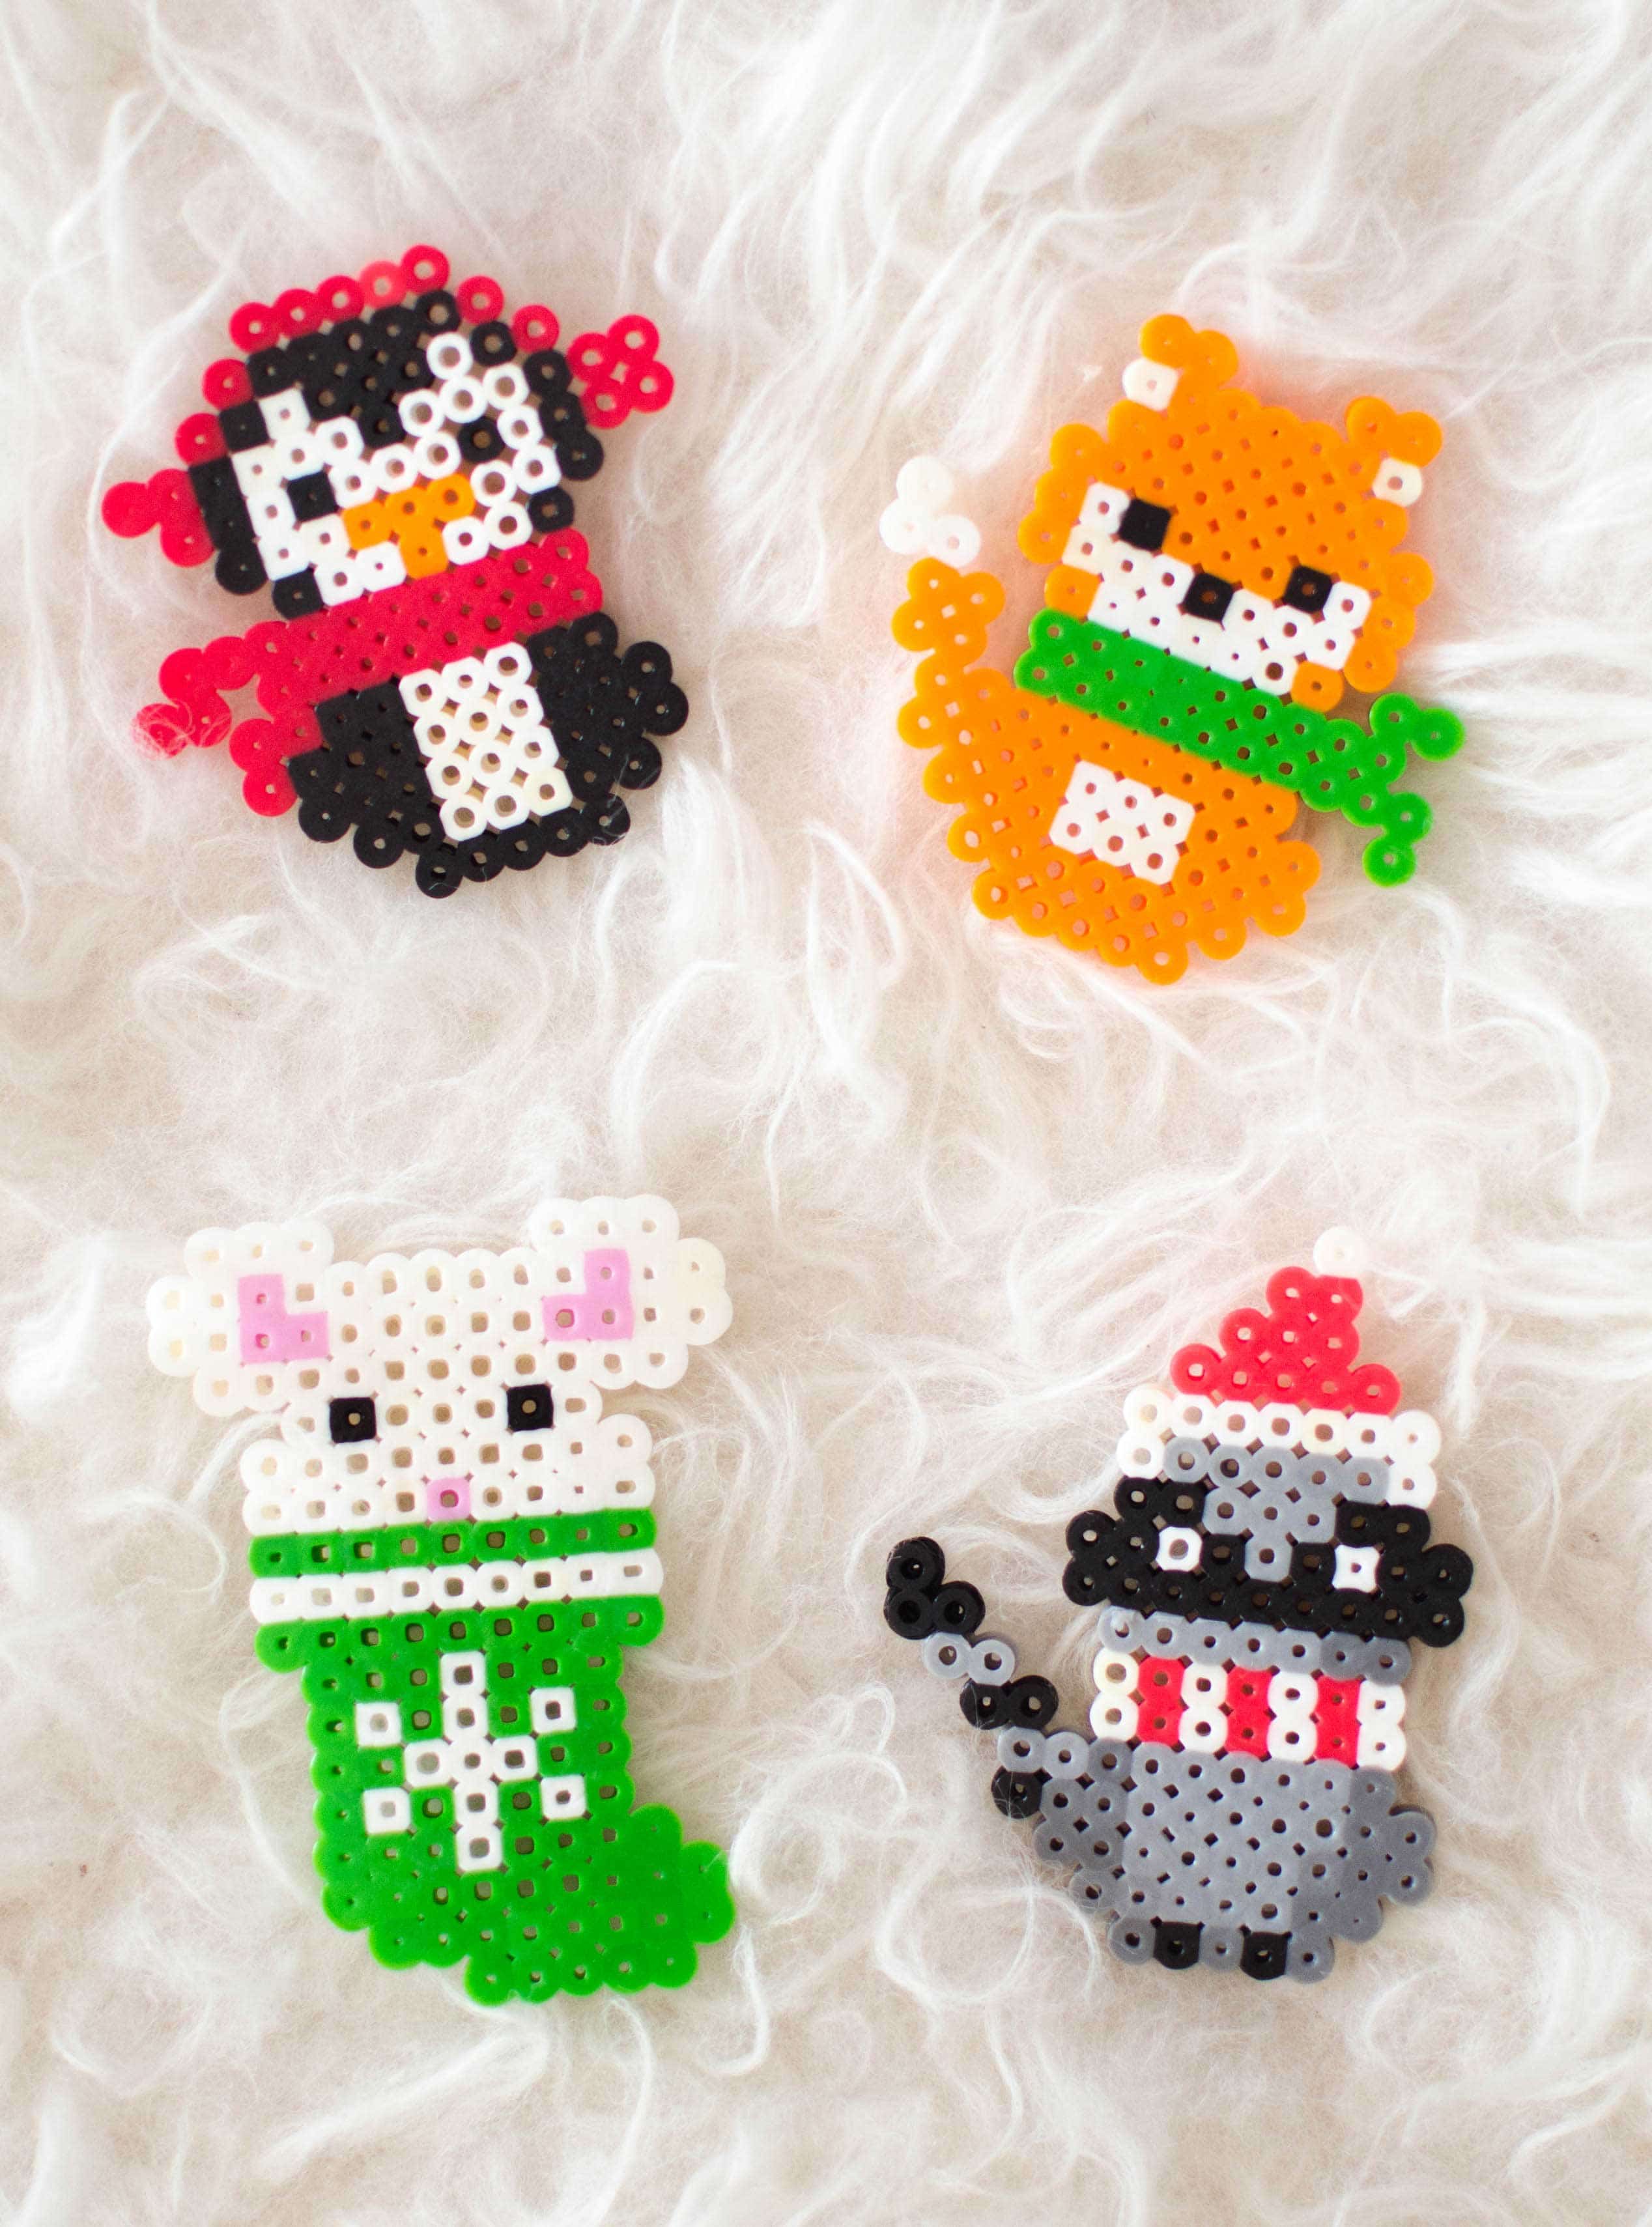 Make these adorable Christmas melty bead ornaments with our printable patterns. #KidsCraftIdeas #DIYChristmasOrnaments #PerlerBeadChristmasPatterns #